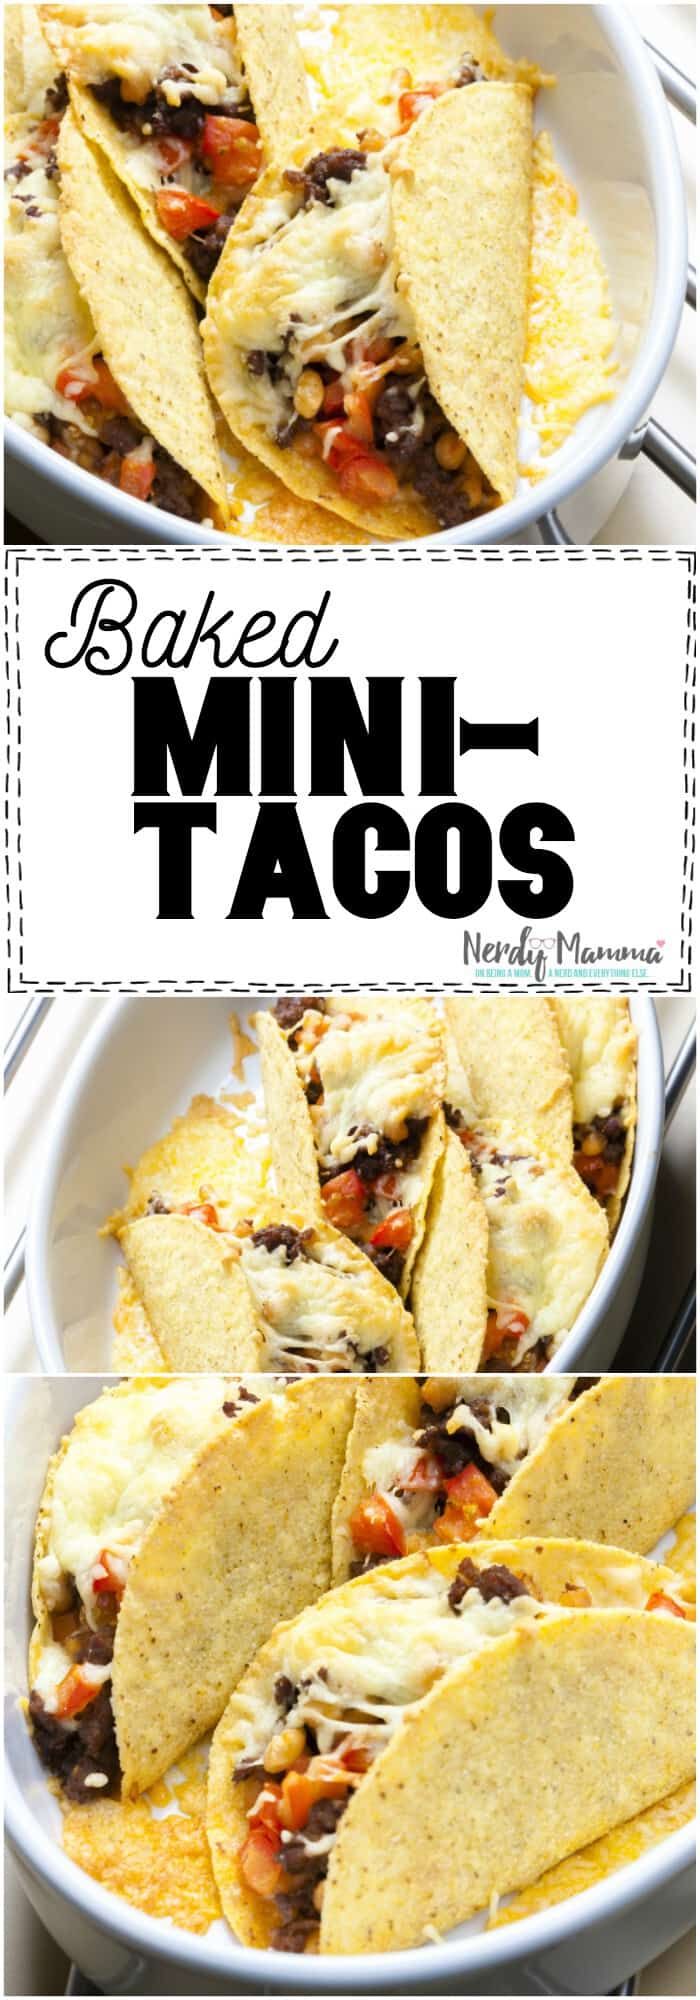 These simple Baked Mini-Tacos are insanely easy appetizers! So awesome. #taco #tacos #appetizer #easy #recipe #tacorecipe #appetizerrecipe